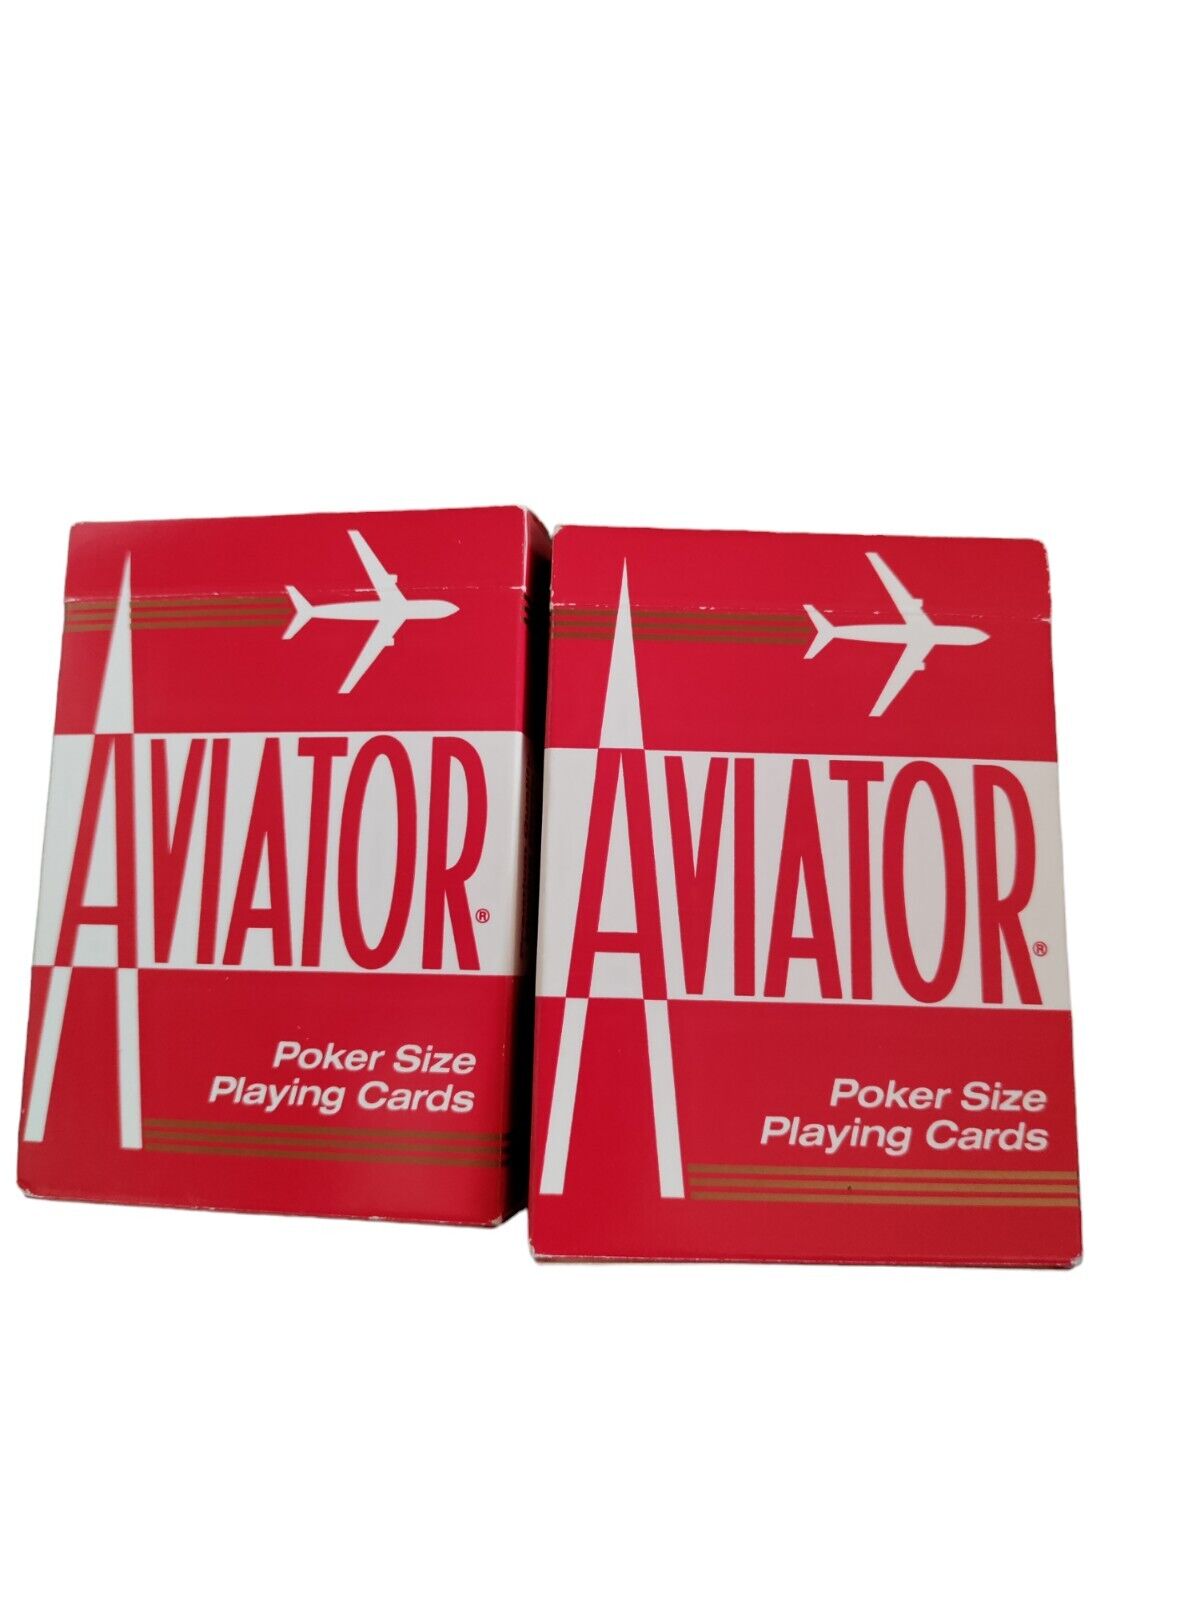 Vintage Aviator Playing Cards #914 Lot Of 2 Red